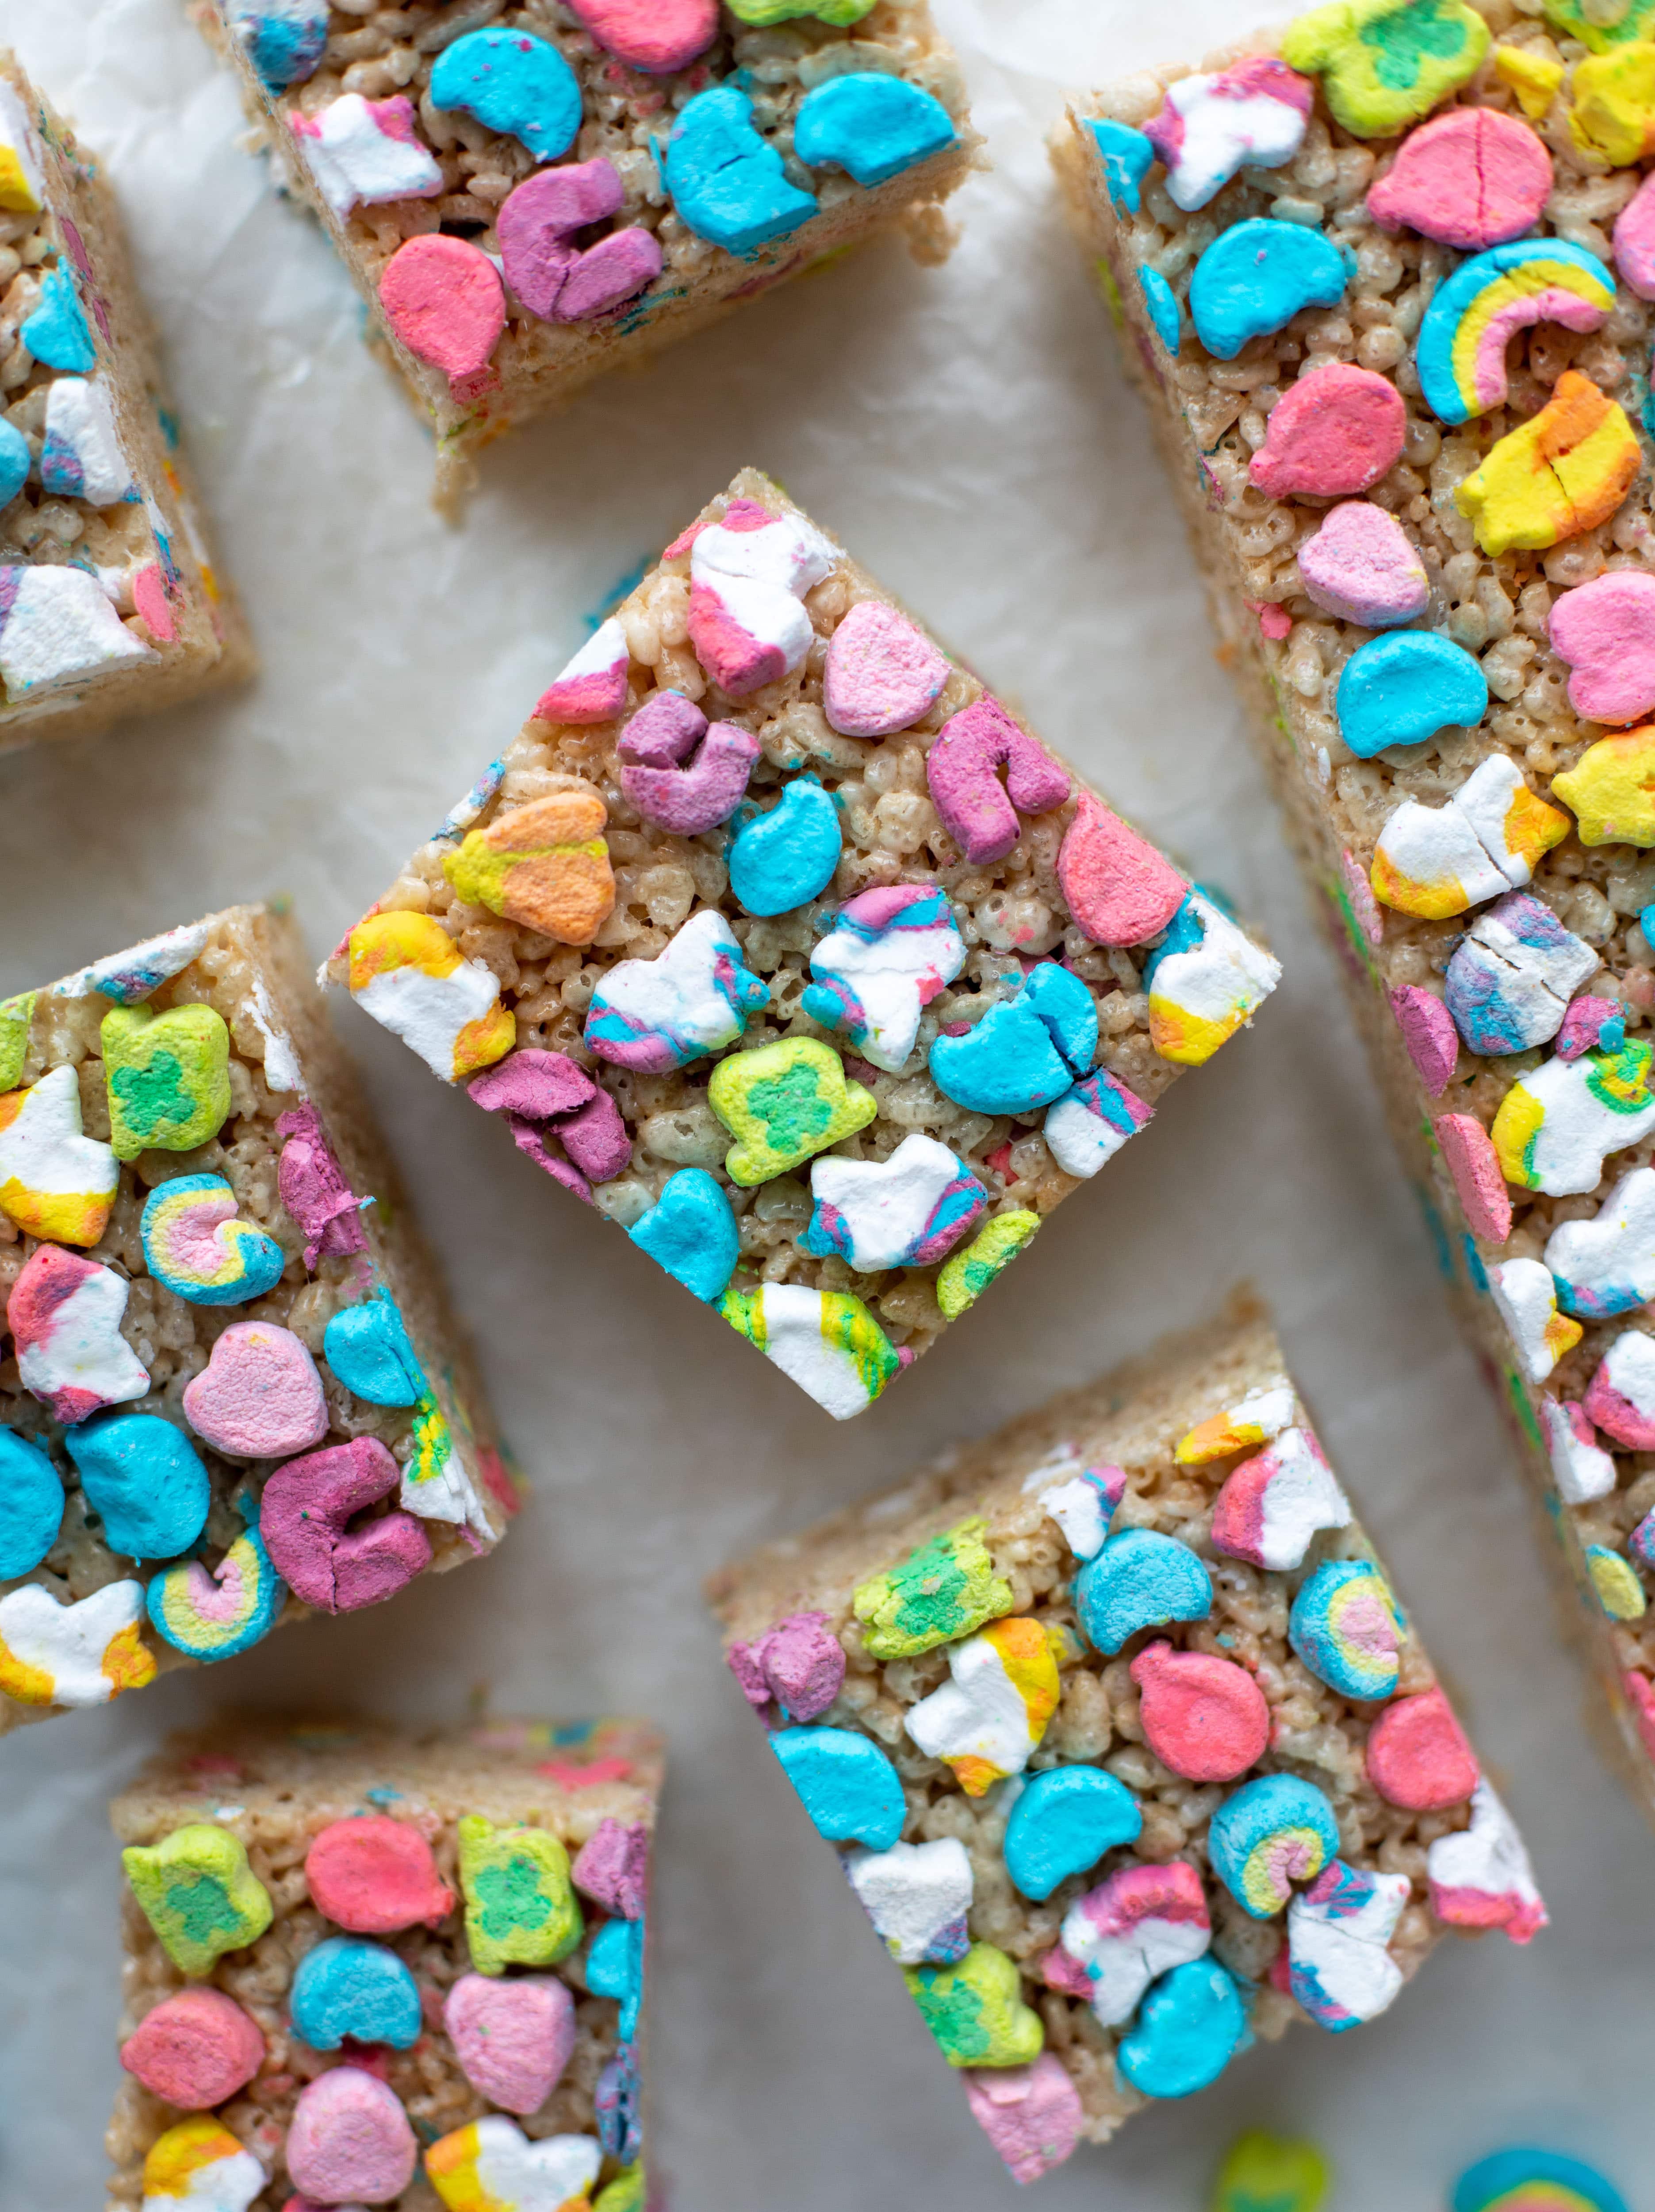 These lucky charms rice krispie treats are a throwback recipe to one of my favorite childhood treats! Here's a little festive twist for Saint Patrick's Day.